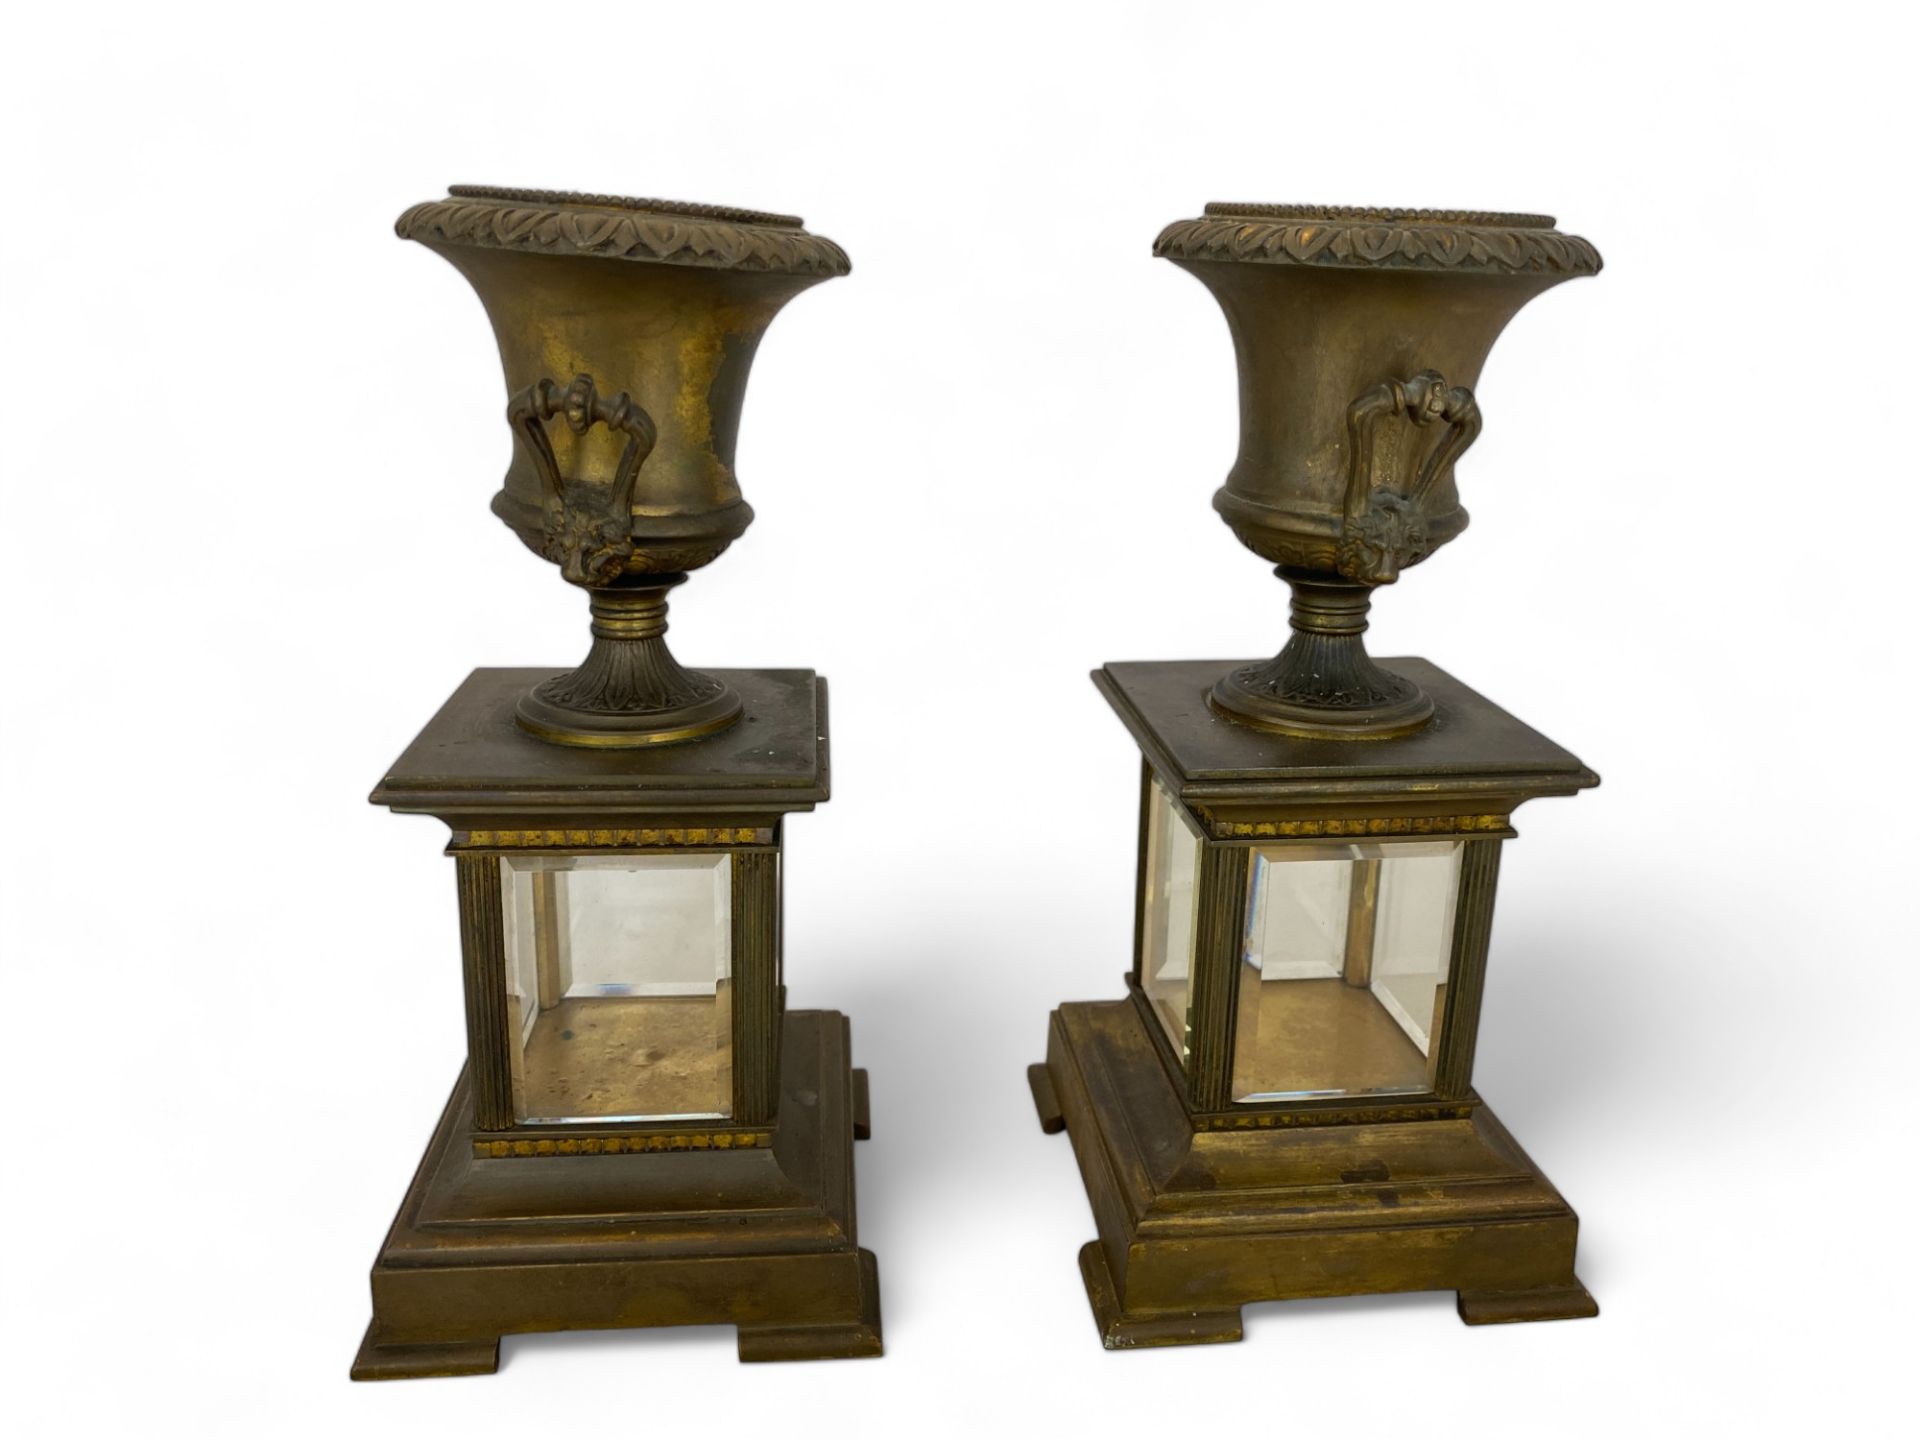 A pair of 19th century gilt bronze chimney ornaments - Image 10 of 12